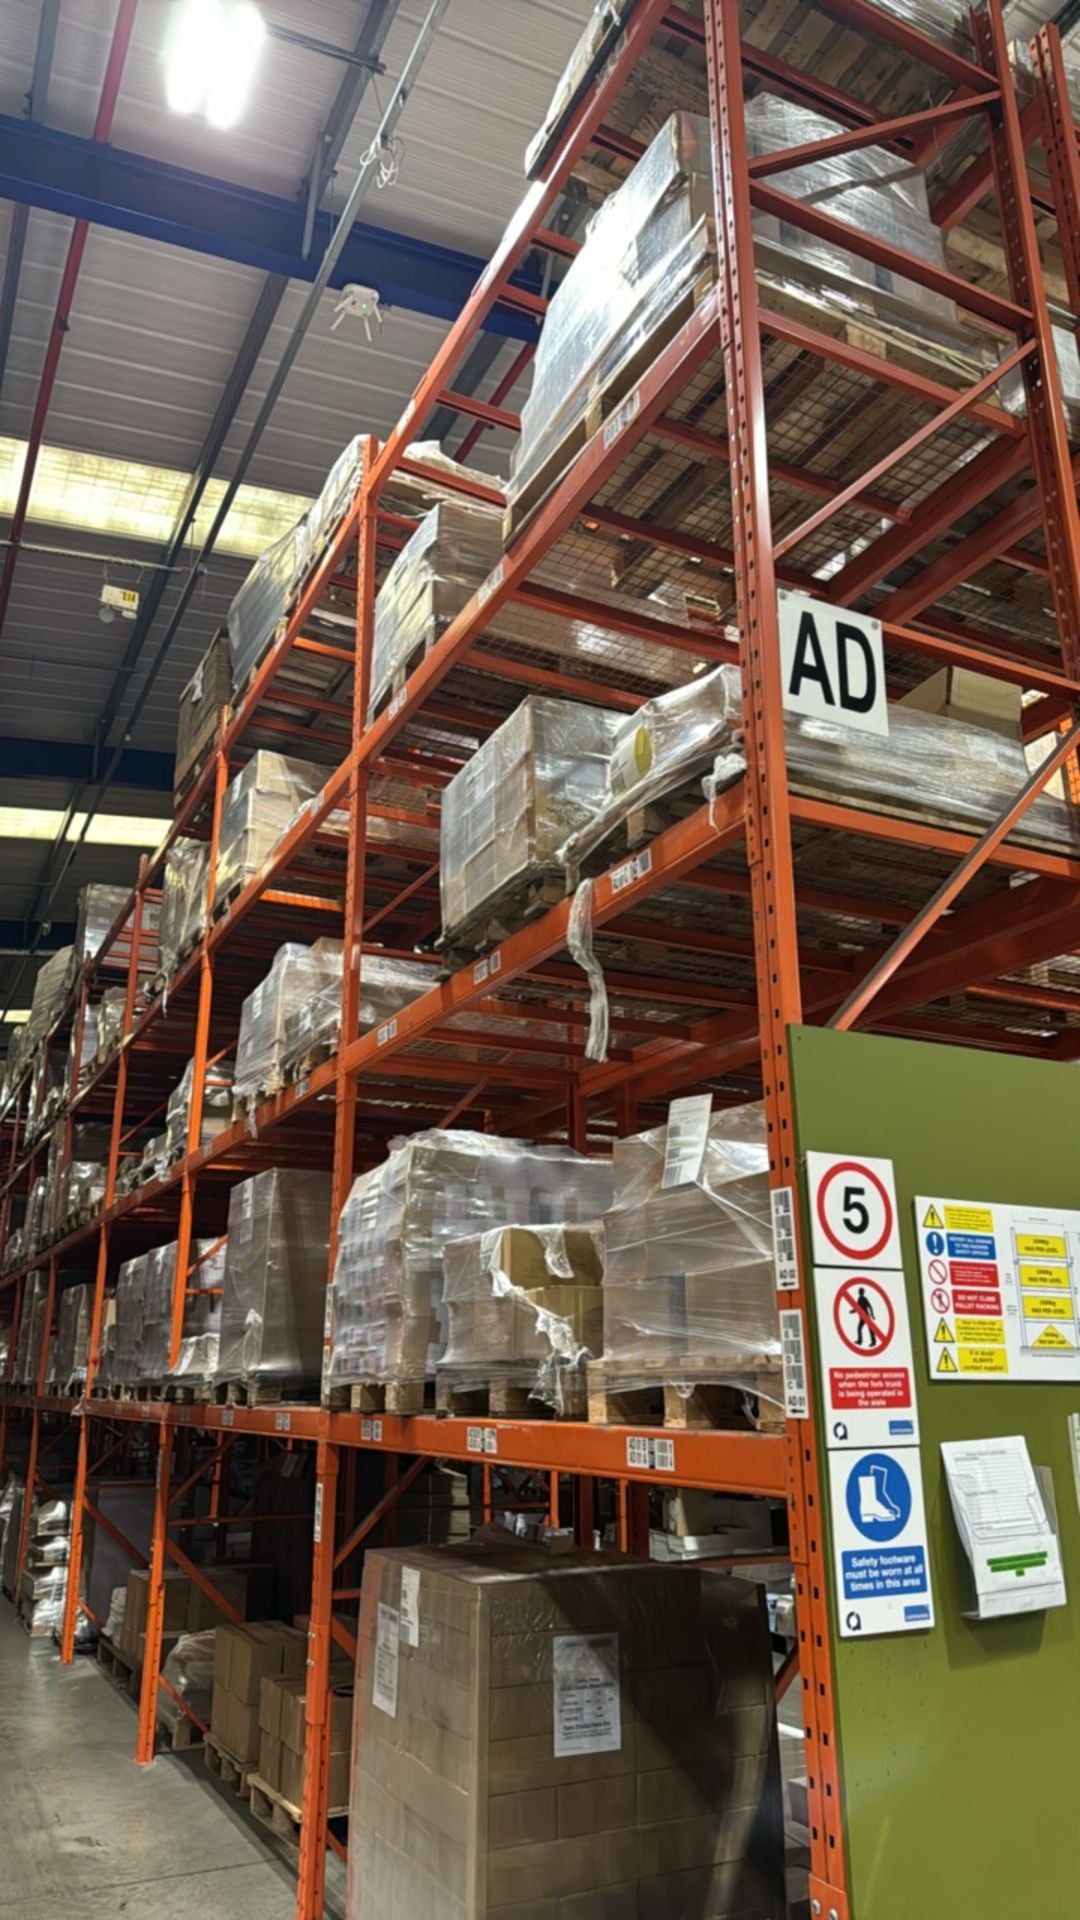 ref 6 - 23 Bays Of Boltless Pallet Racking - Image 2 of 9